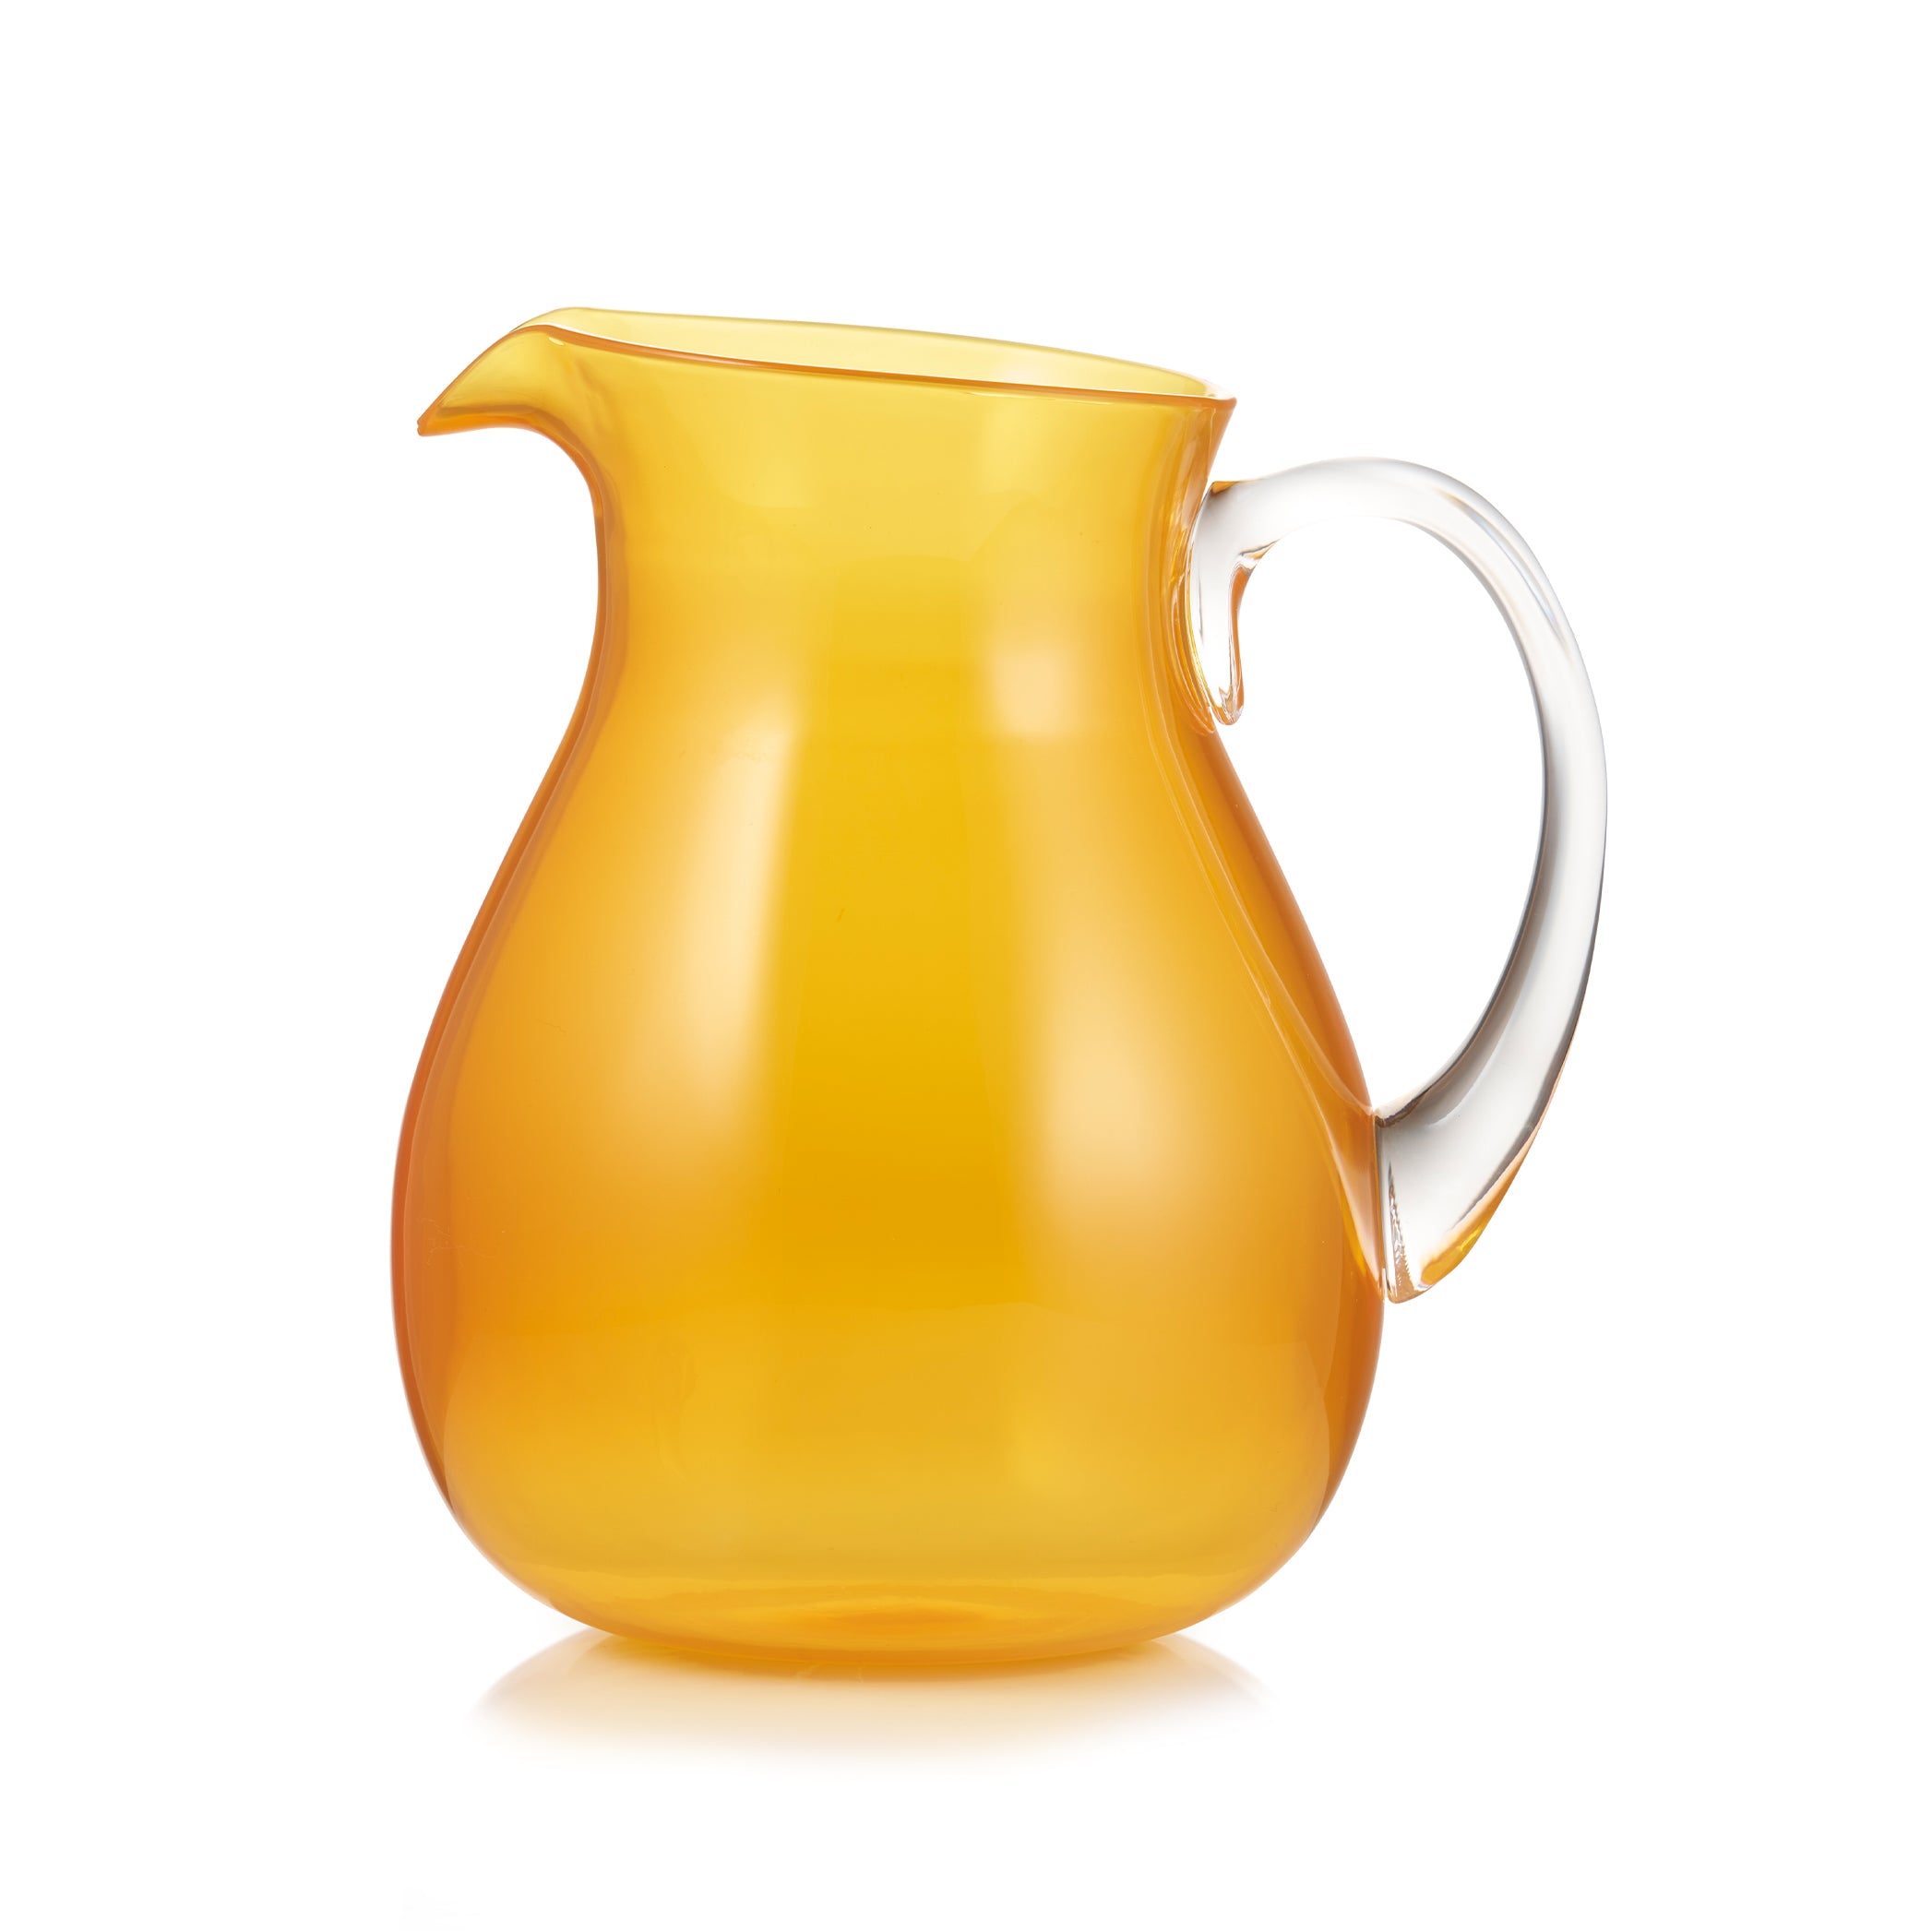 Recyclable Plastic Bobby Pitcher in Mustard Yellow